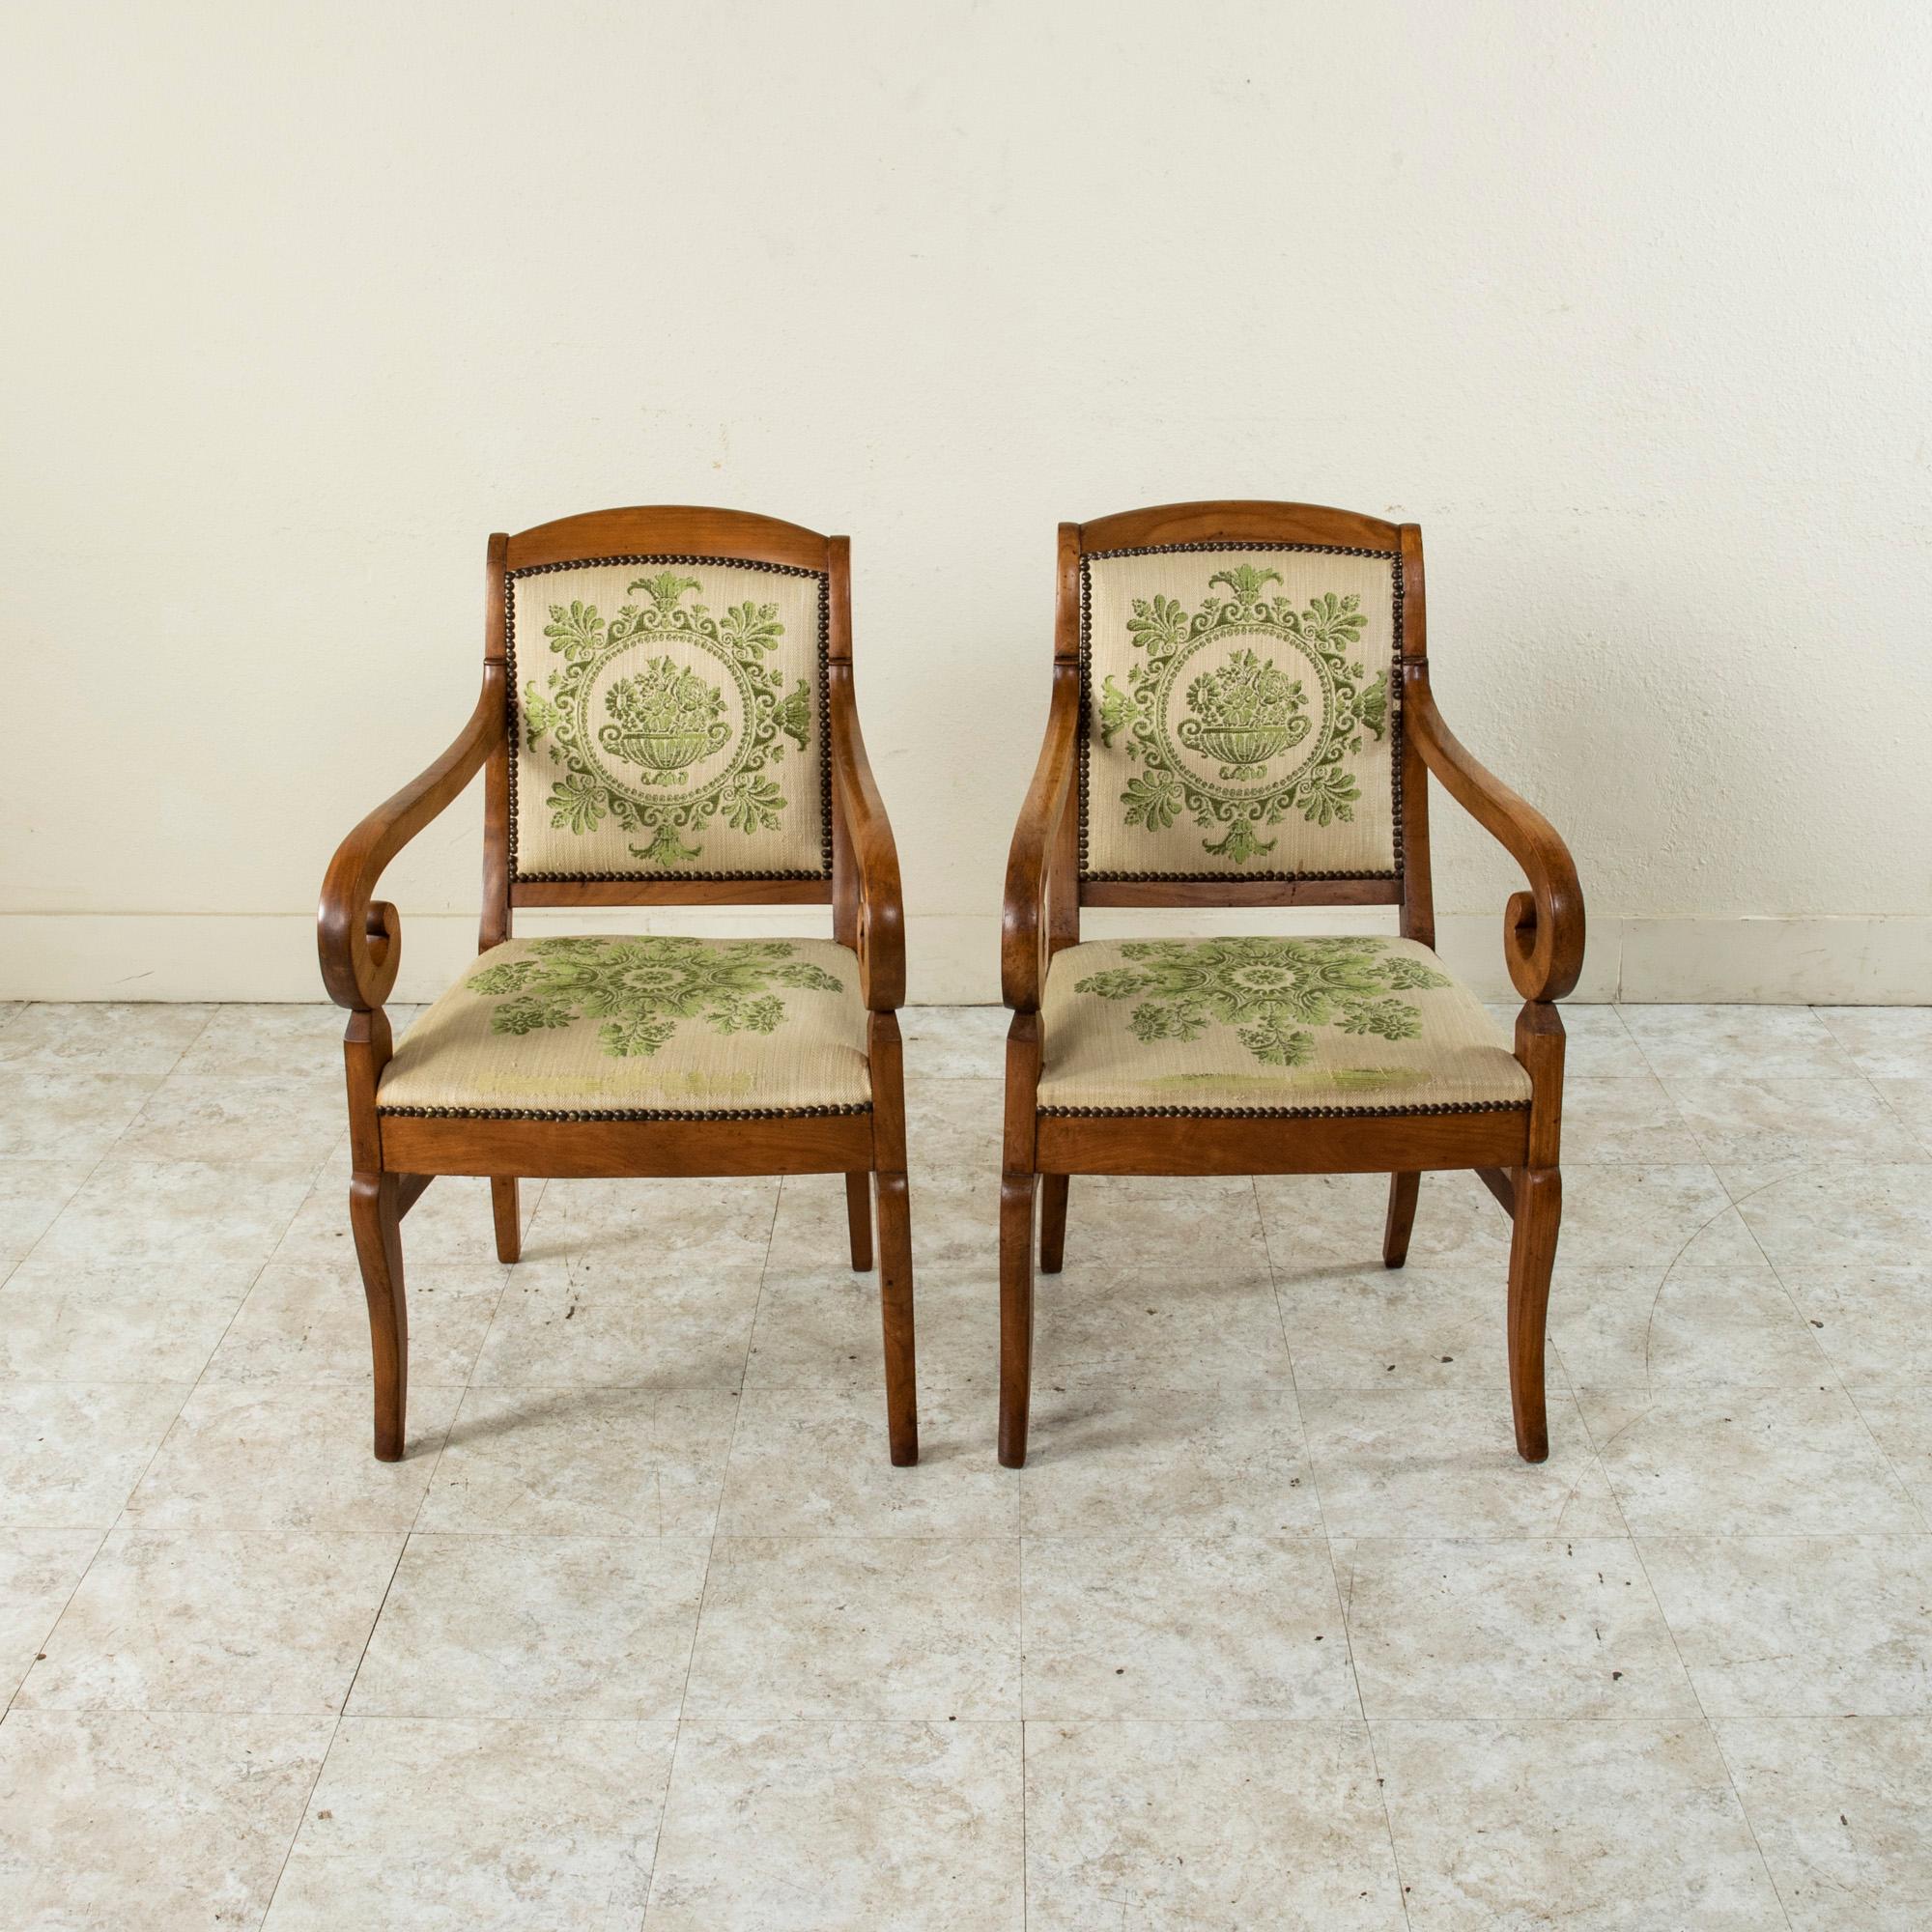 This pair of French Restauration period walnut armchairs from the early nineteenth century features scrolling arms and gently curved legs. The back legs are flared 